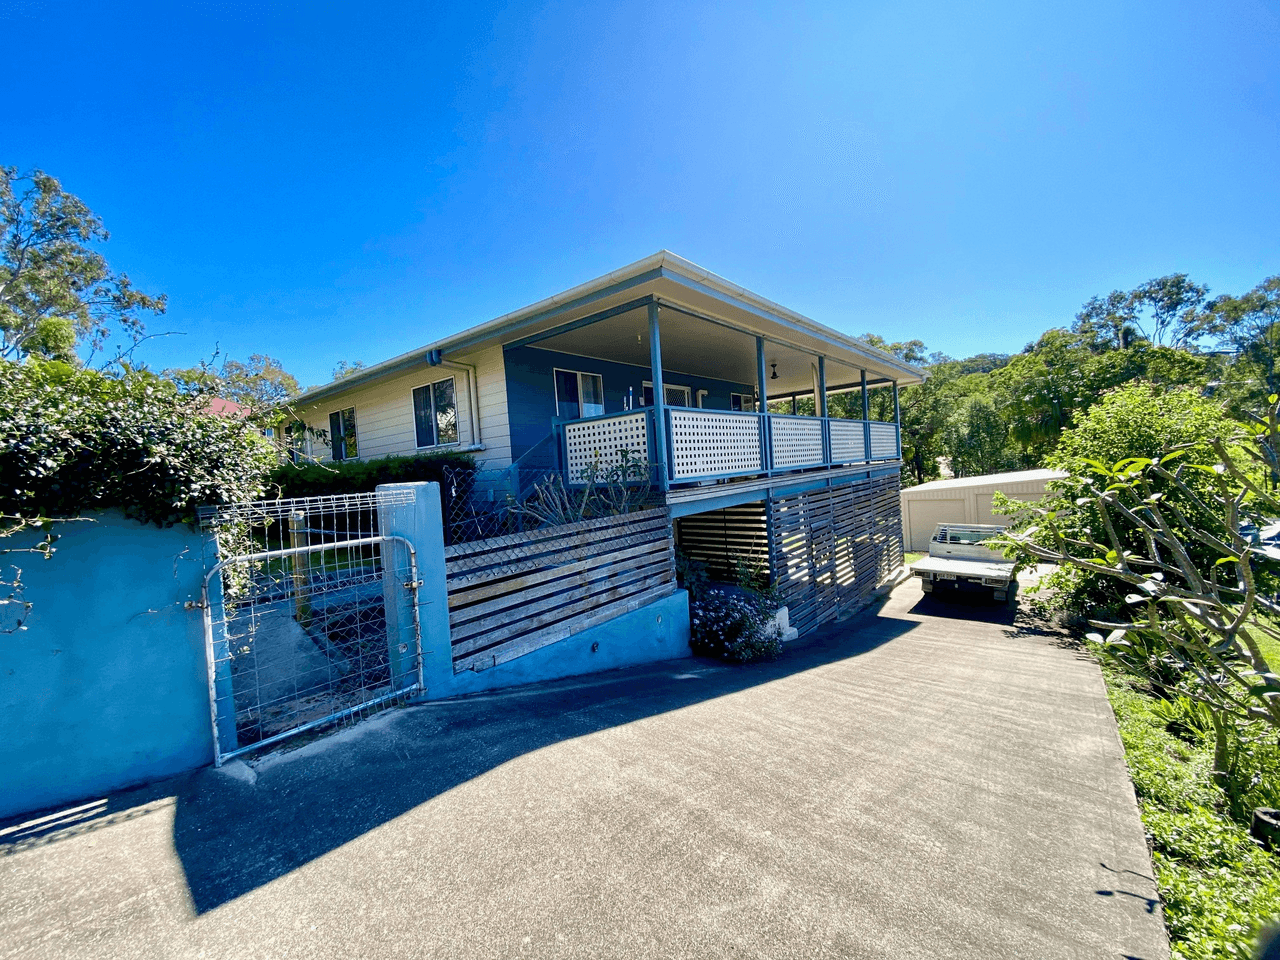 14 SUNLOVER AVE, AGNES WATER, QLD 4677